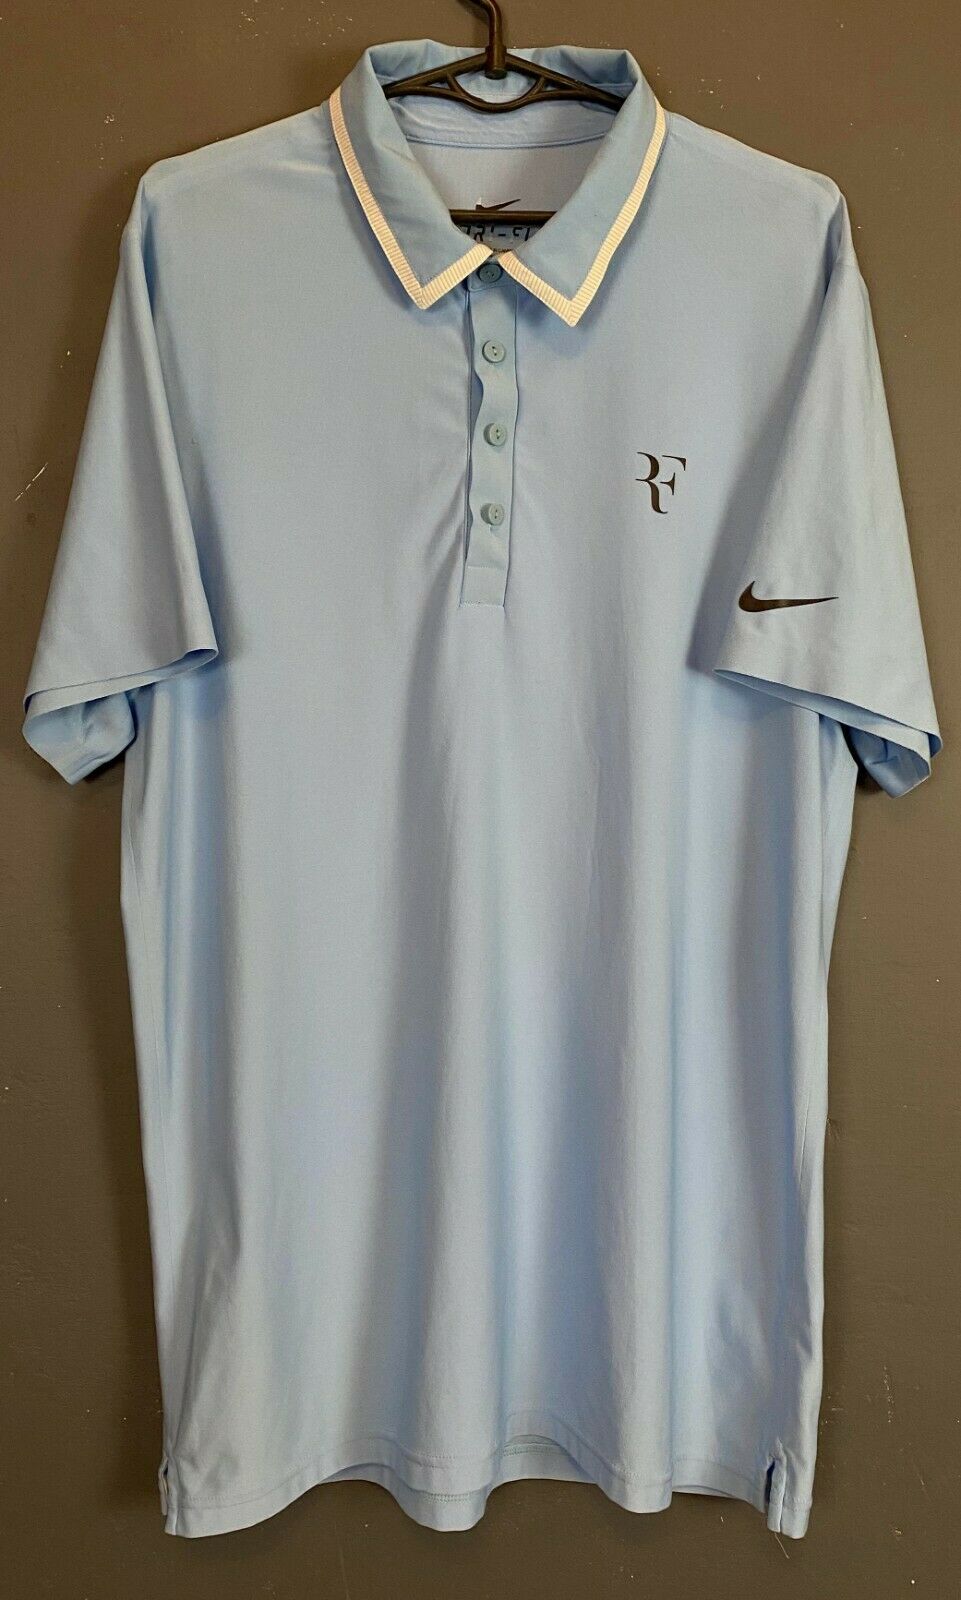 Men's Nike Victory Rf Roger Federer Tennis Shirt Jersey Polo Golf Size S Small